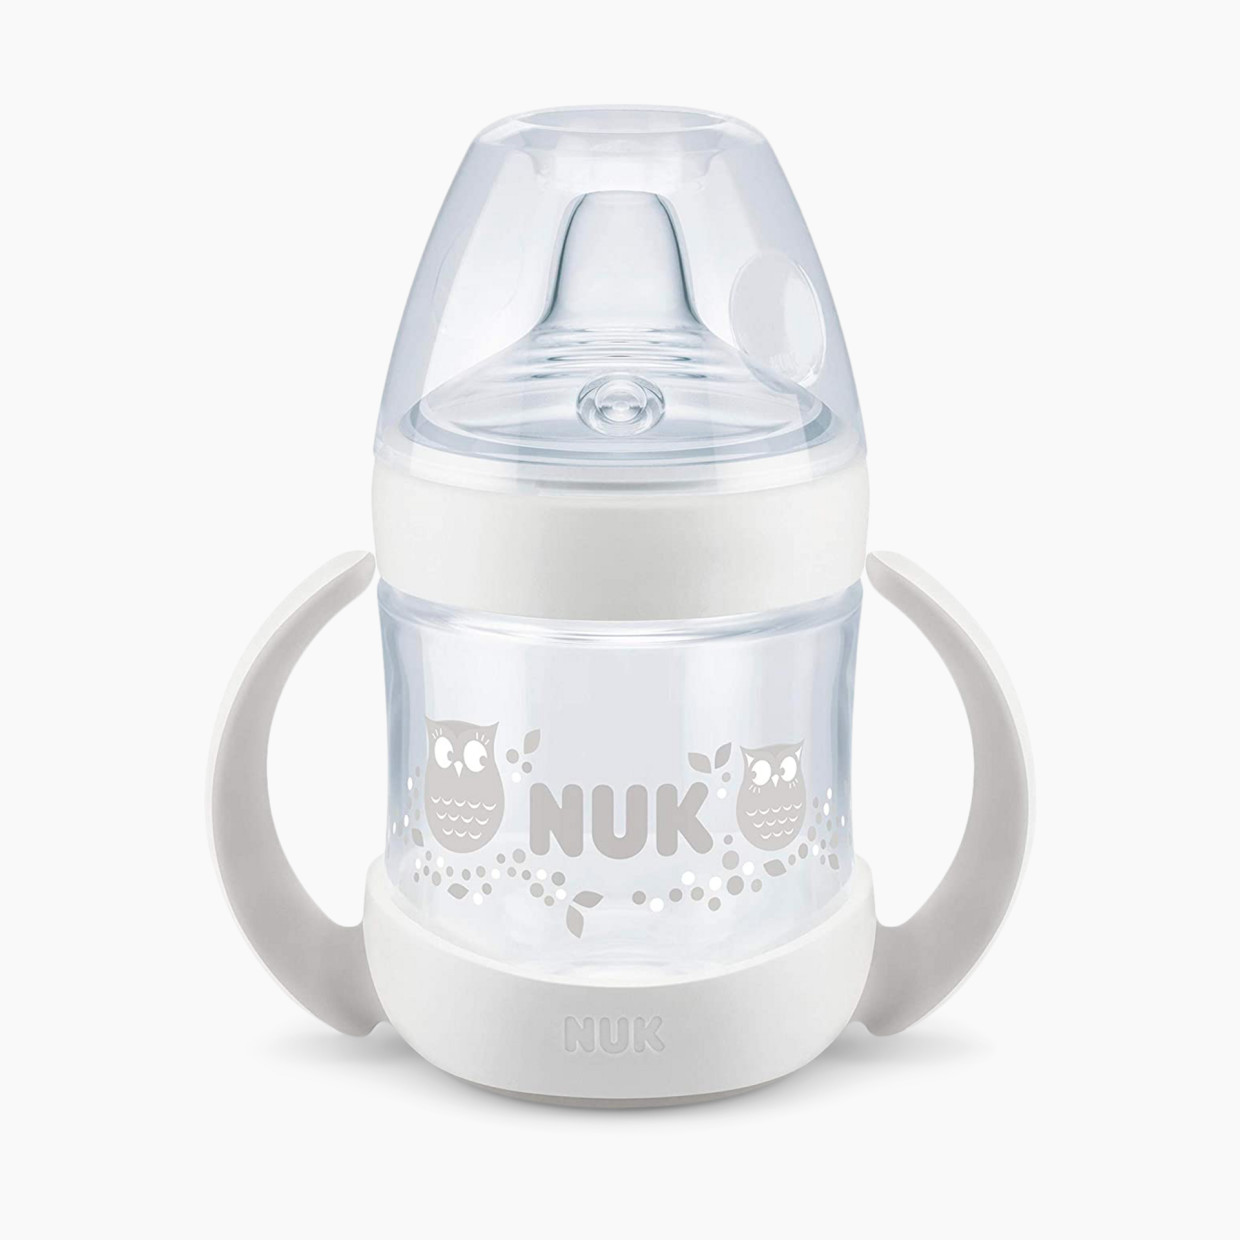 NUK Simply Natural Learner Cup - Owl, 5 Oz, 1.